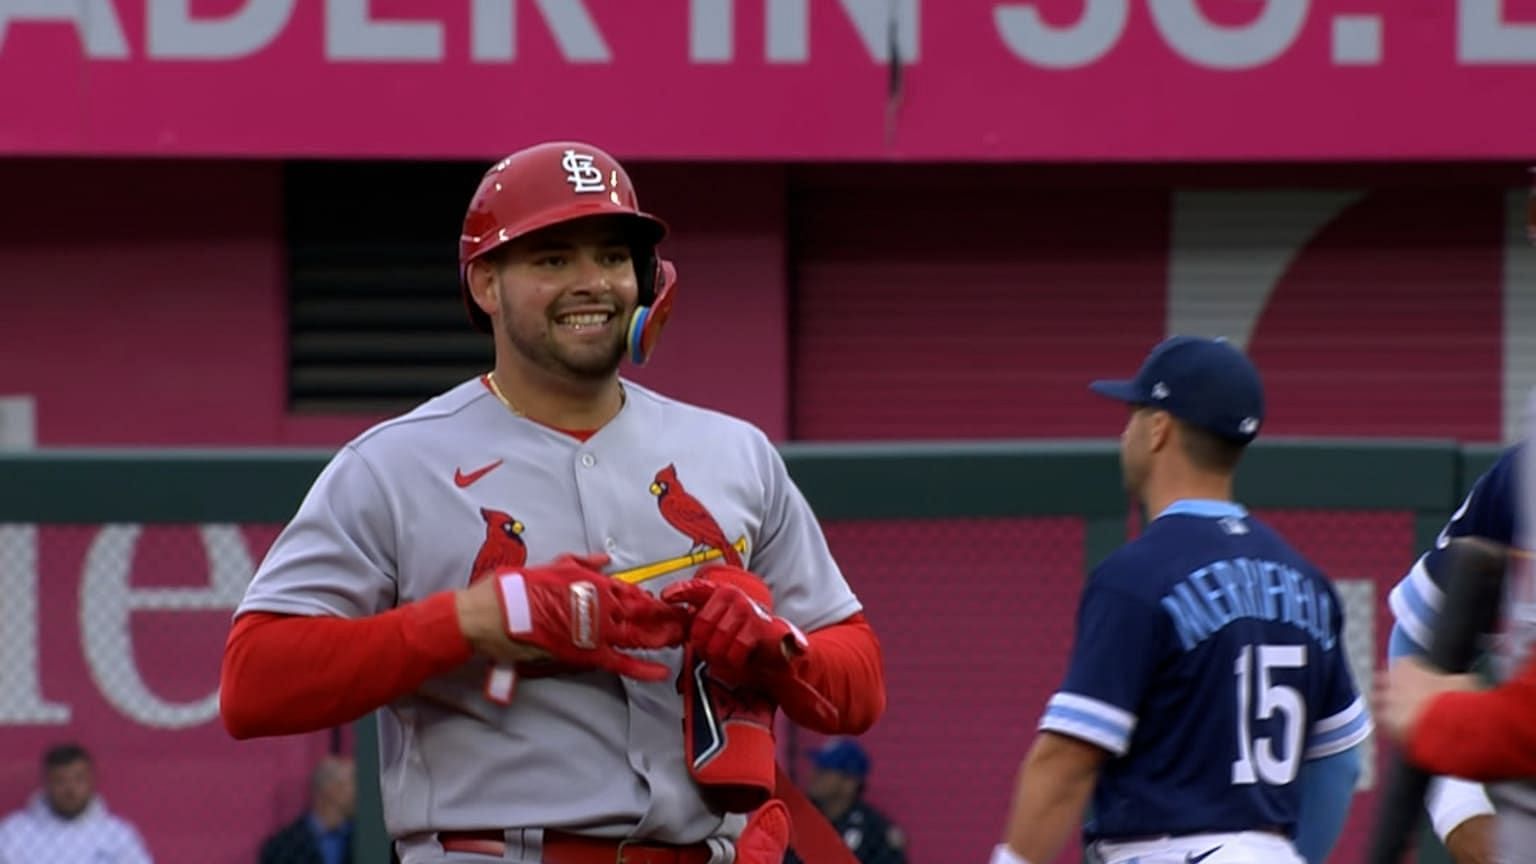 Juan Yepez became the first Cardinals player ever to have two doubles in their MLB debut.